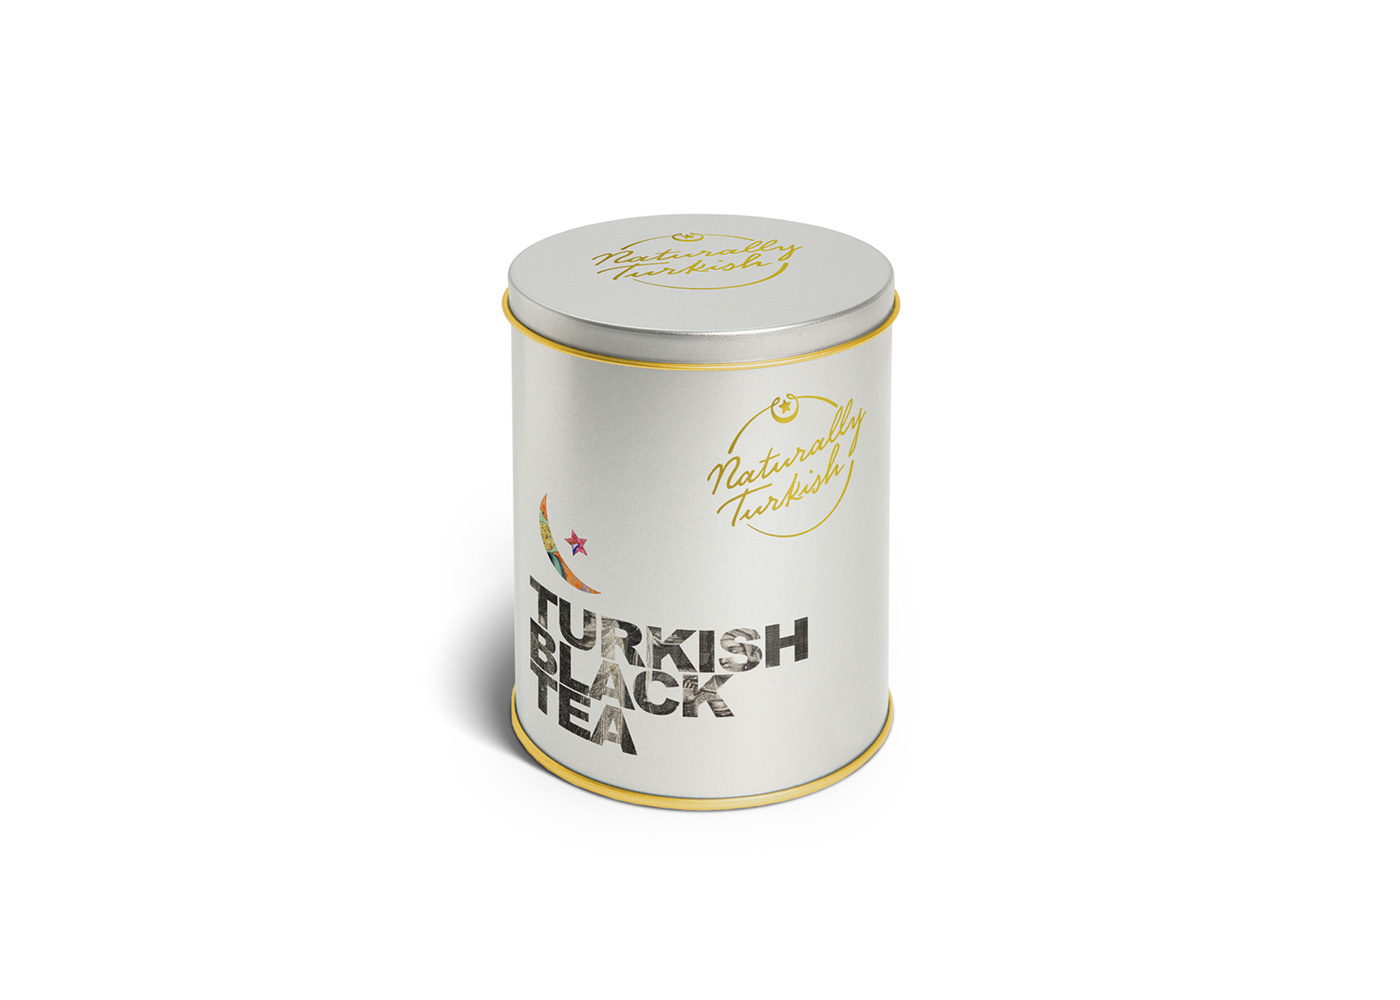 Love From Turkey Packaging packaging design Logo Design Corporate Identity graphic design 